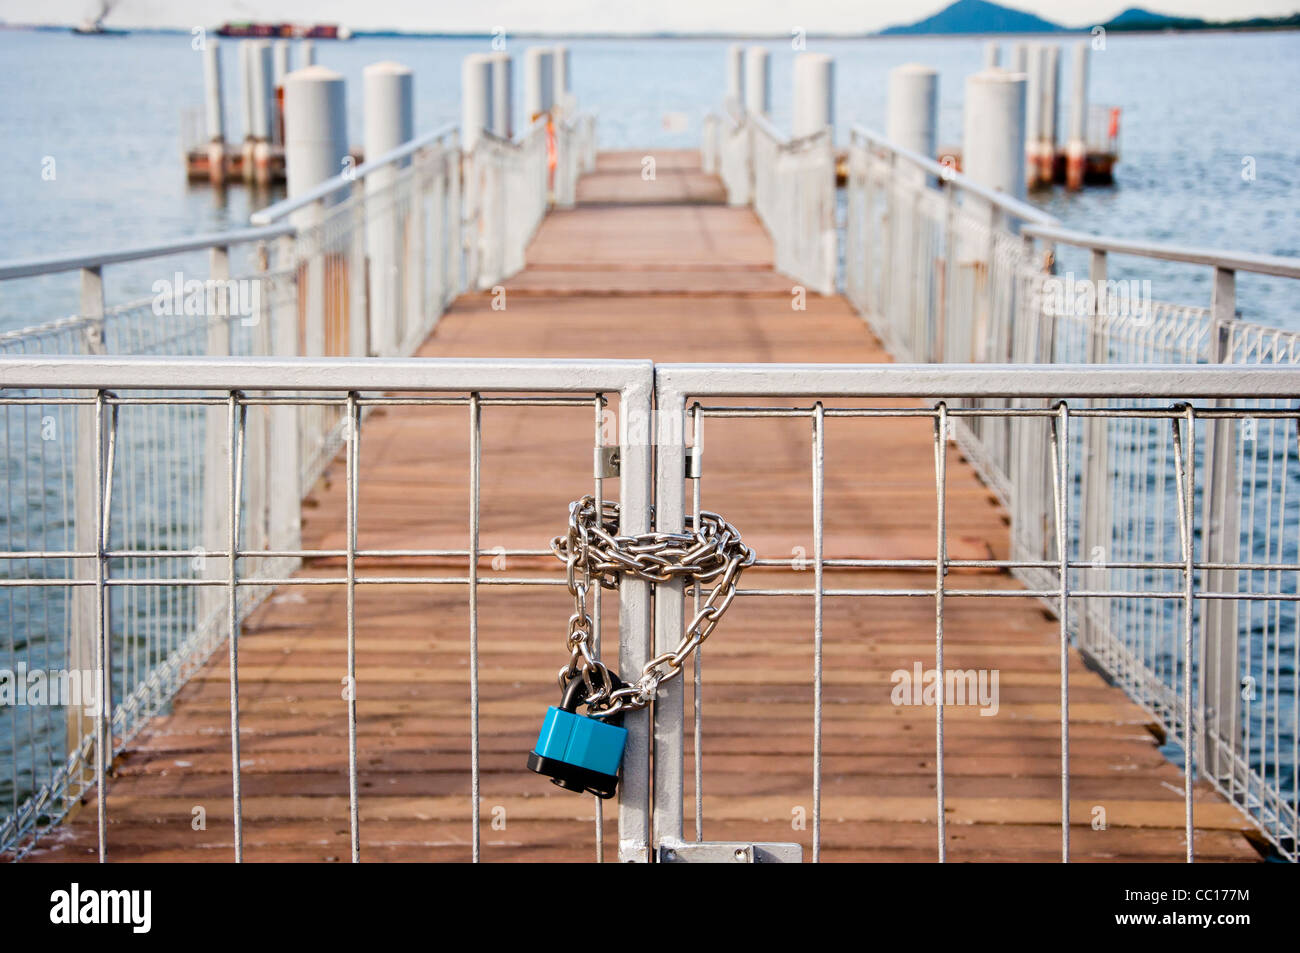 A chain lock upon a gate leading to a pier in the distance Stock Photo